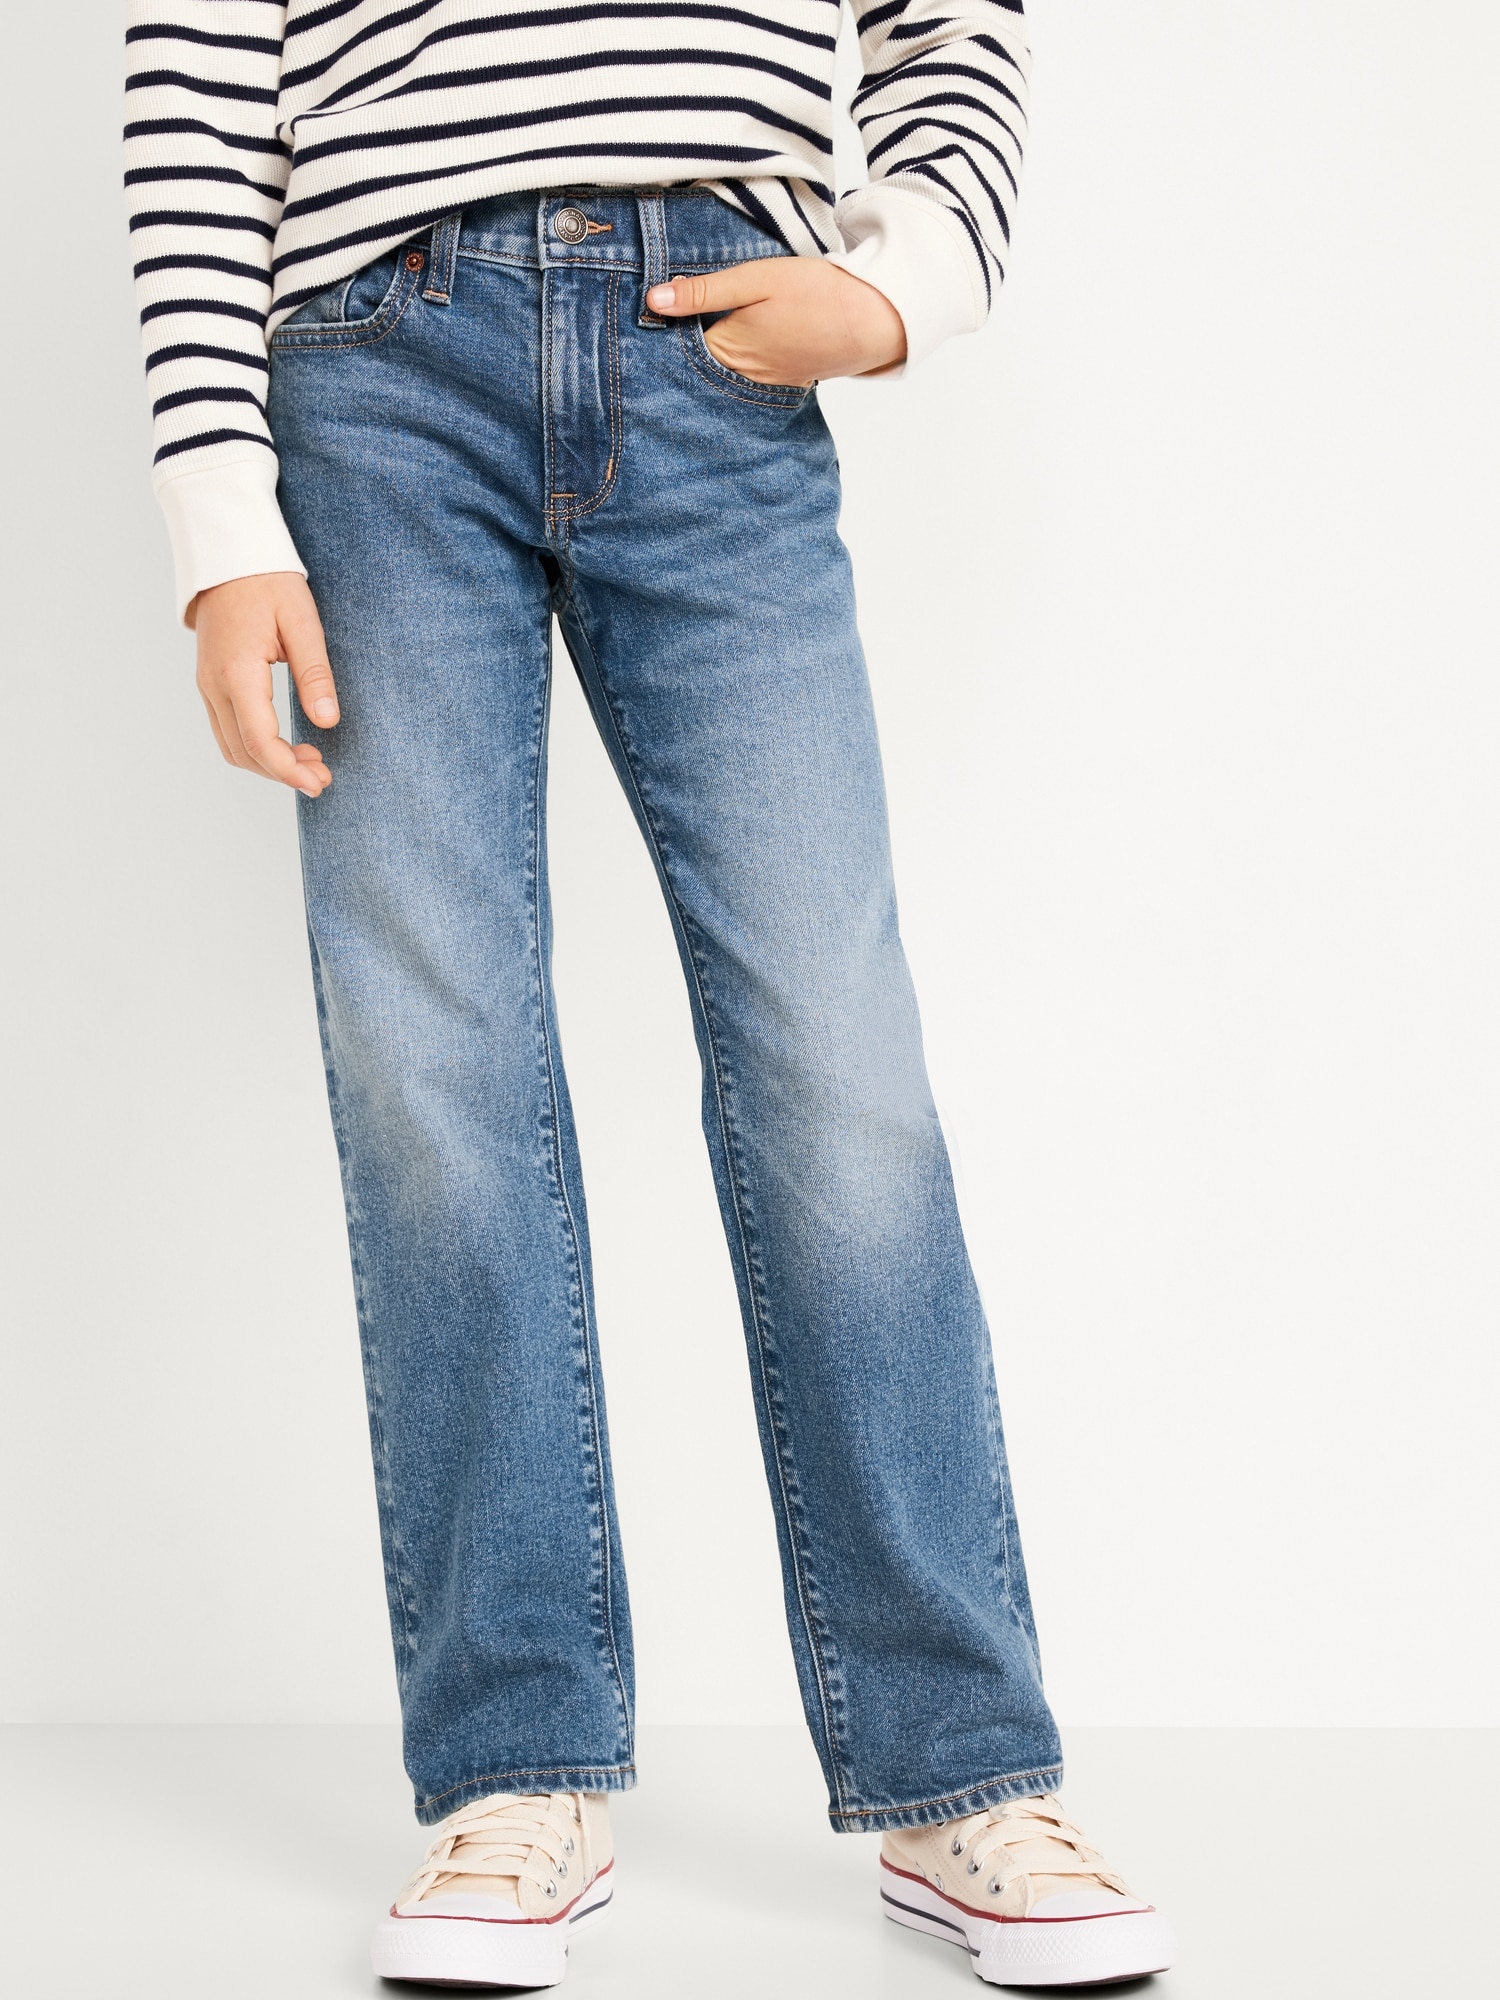 Straight Jeans for Boys